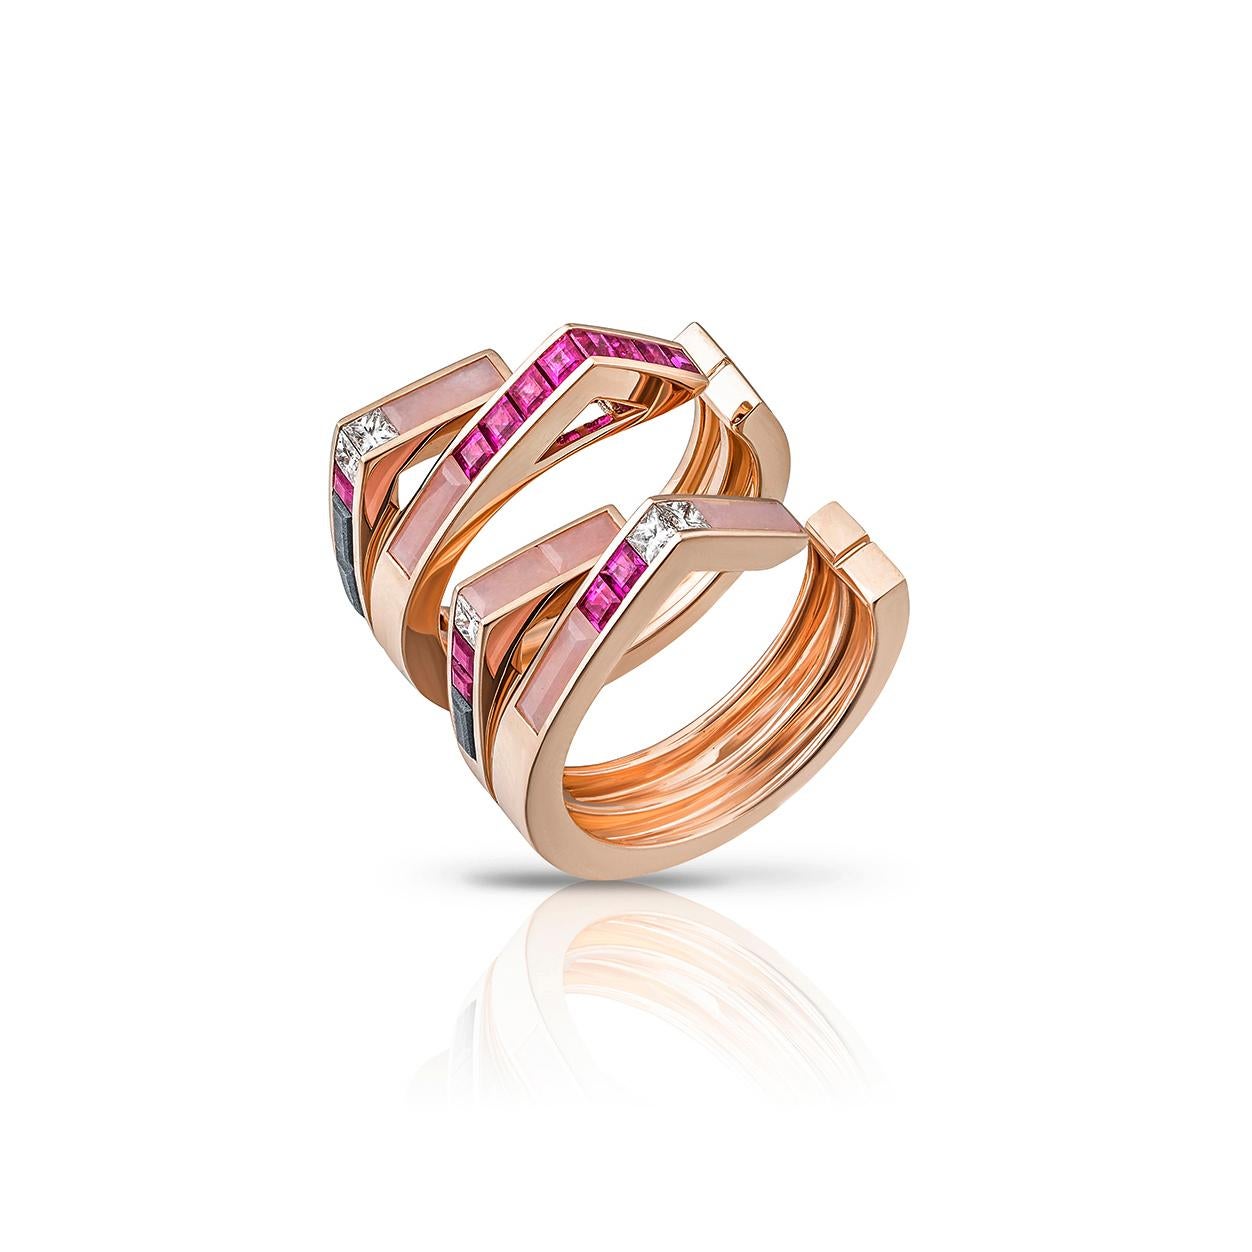 This pair of stack rings can be worn together or separately and feature channel-set baguette and square-cut diamonds and gemstones.
Materials: 18K Rose Gold set with White Diamonds, Mozambique Rubies, Pink Opal and Hematite.
Made to order within 5